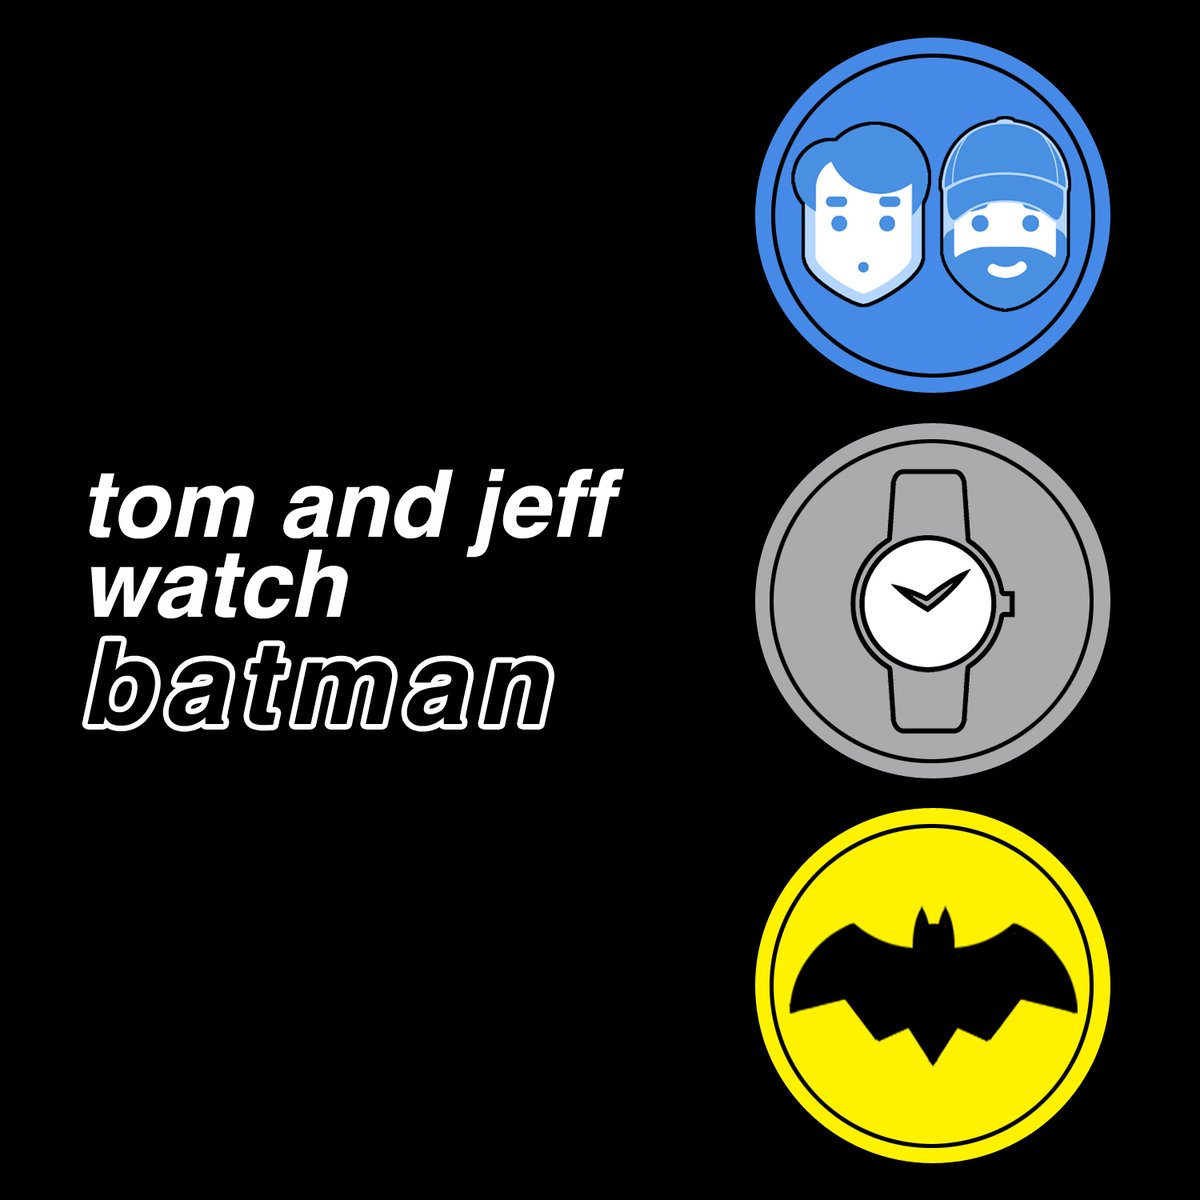 It's a brand new TOM AND JEFF WATCH BATMAN! Listen to @heytherejeffro and @startthemachine talk handsomely about part two of Justice League x RWBY: Super Heroes & Huntsmen. Only on Patreon! patreon.com/posts/10208680…